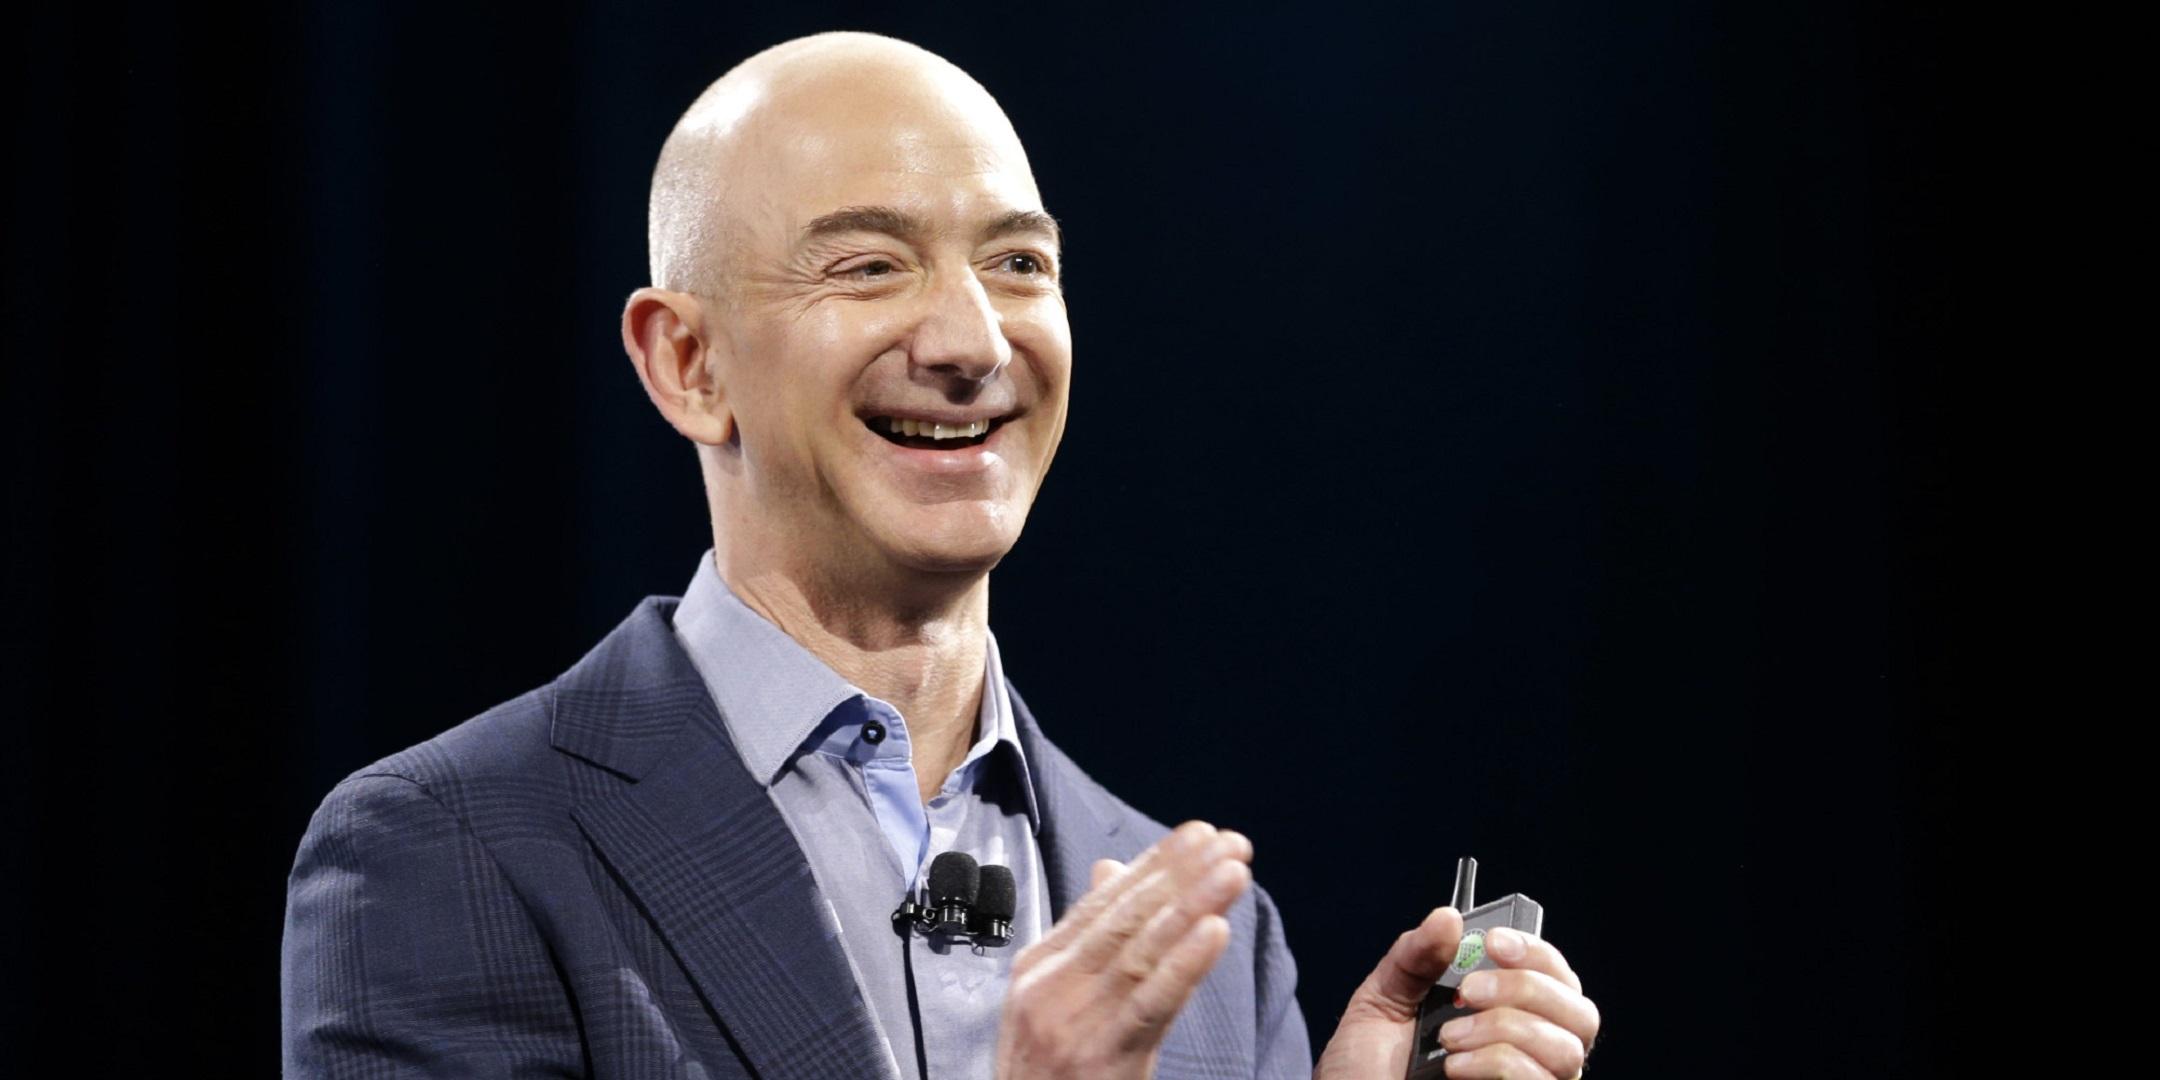 Jeff Bezos Wallpapers Image Photos Pictures Backgrounds